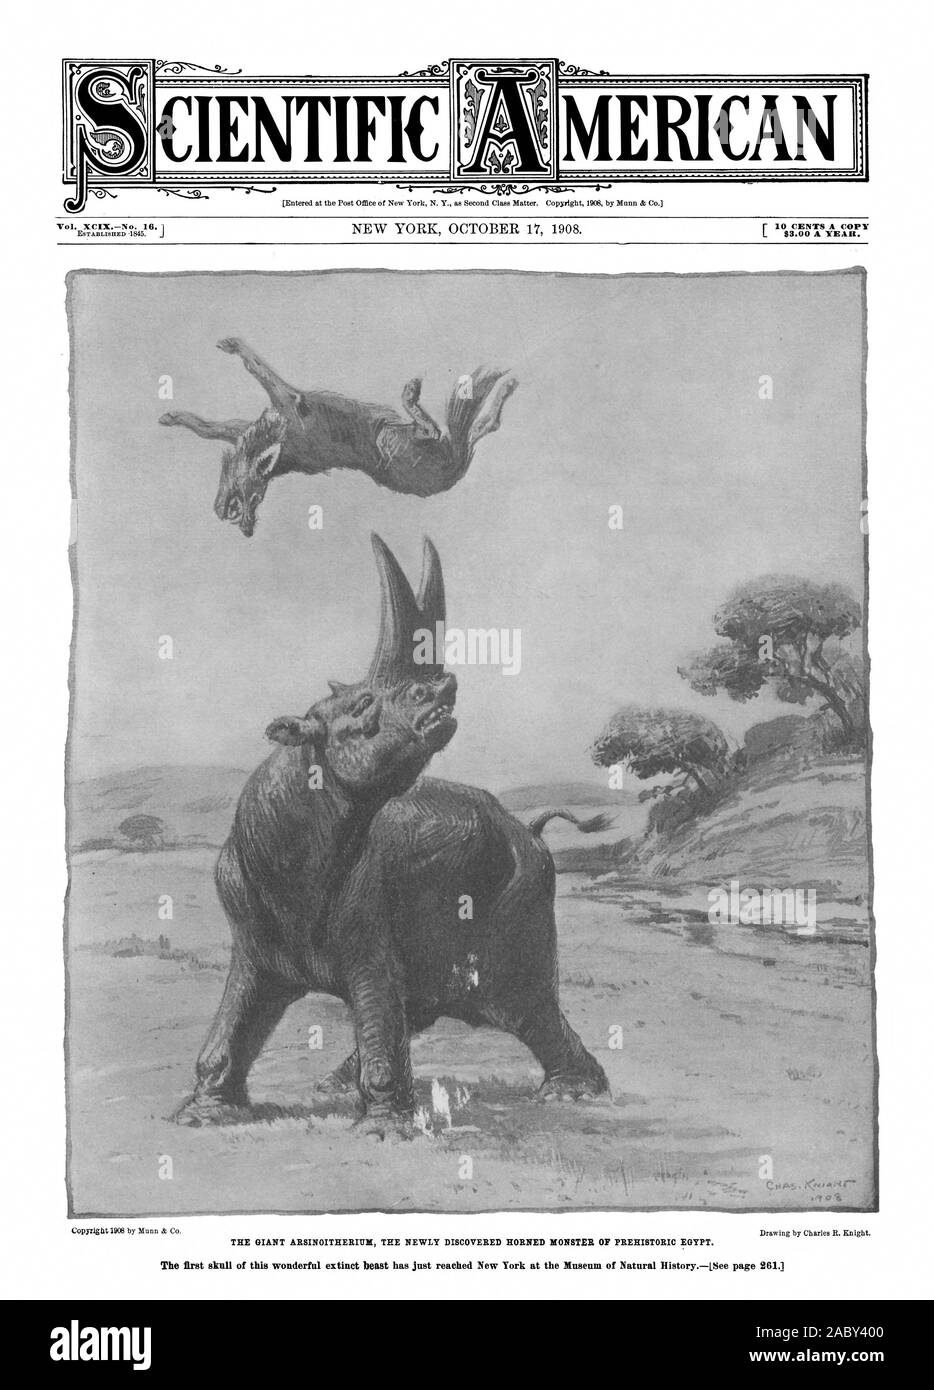 10 CENTS A COPY $3.00 A YEAR. CIENTIFIC MERICA THE GIANT ARSINOITHERIUM THE NEWLY DISCOVERED HORNED MONSTER OF PREHISTORIC EGYPT., scientific american, 1908-10-17, giant Arsinoitherium Stock Photo